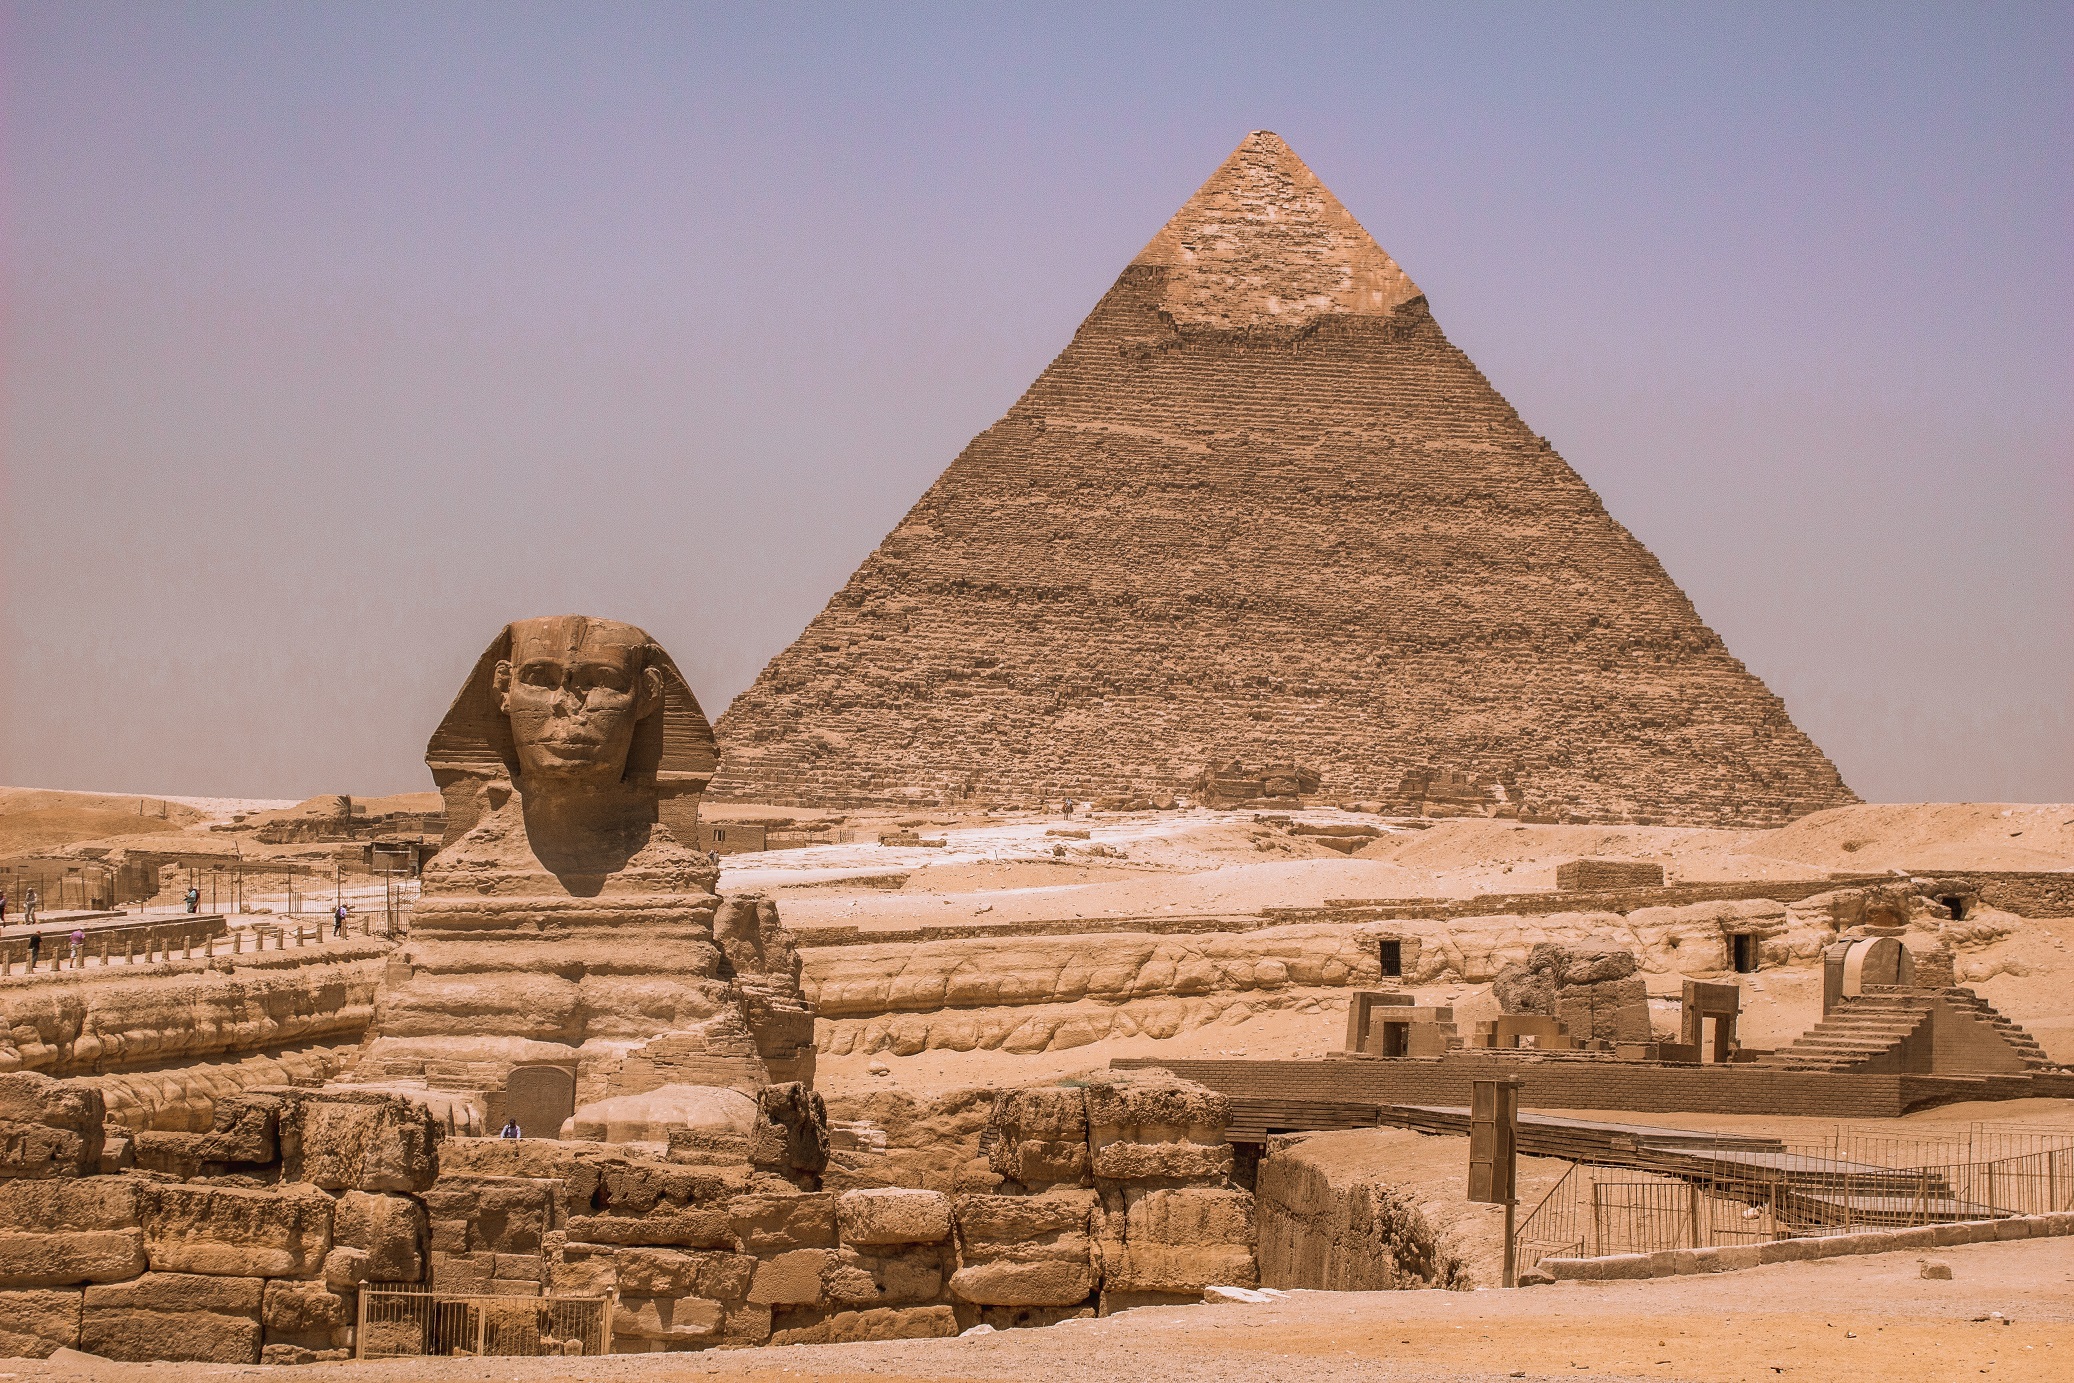 Day 03: The Pyramids and Sphinx of Giza